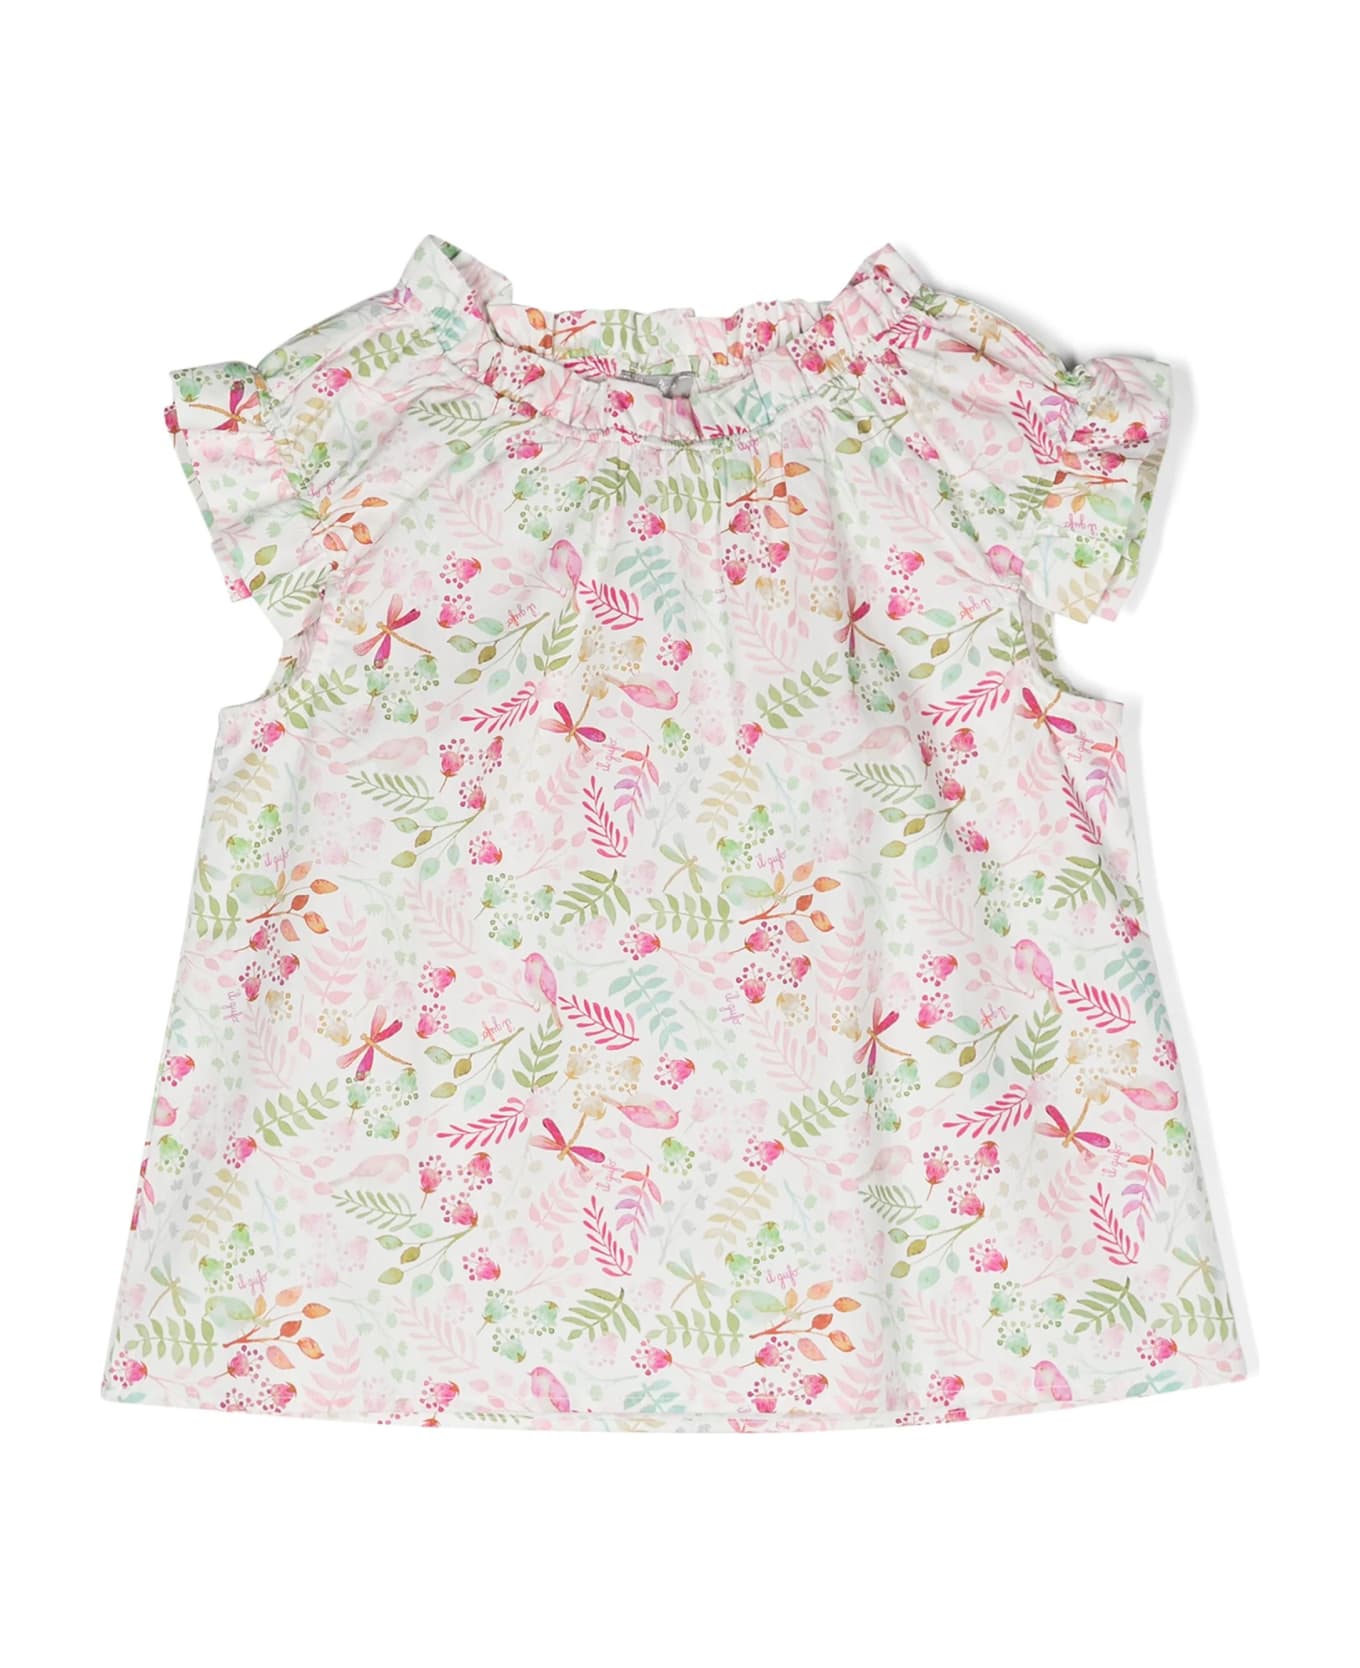 Il Gufo Top With Exclusive Flower Print In Pink Pepper Colour - Pink